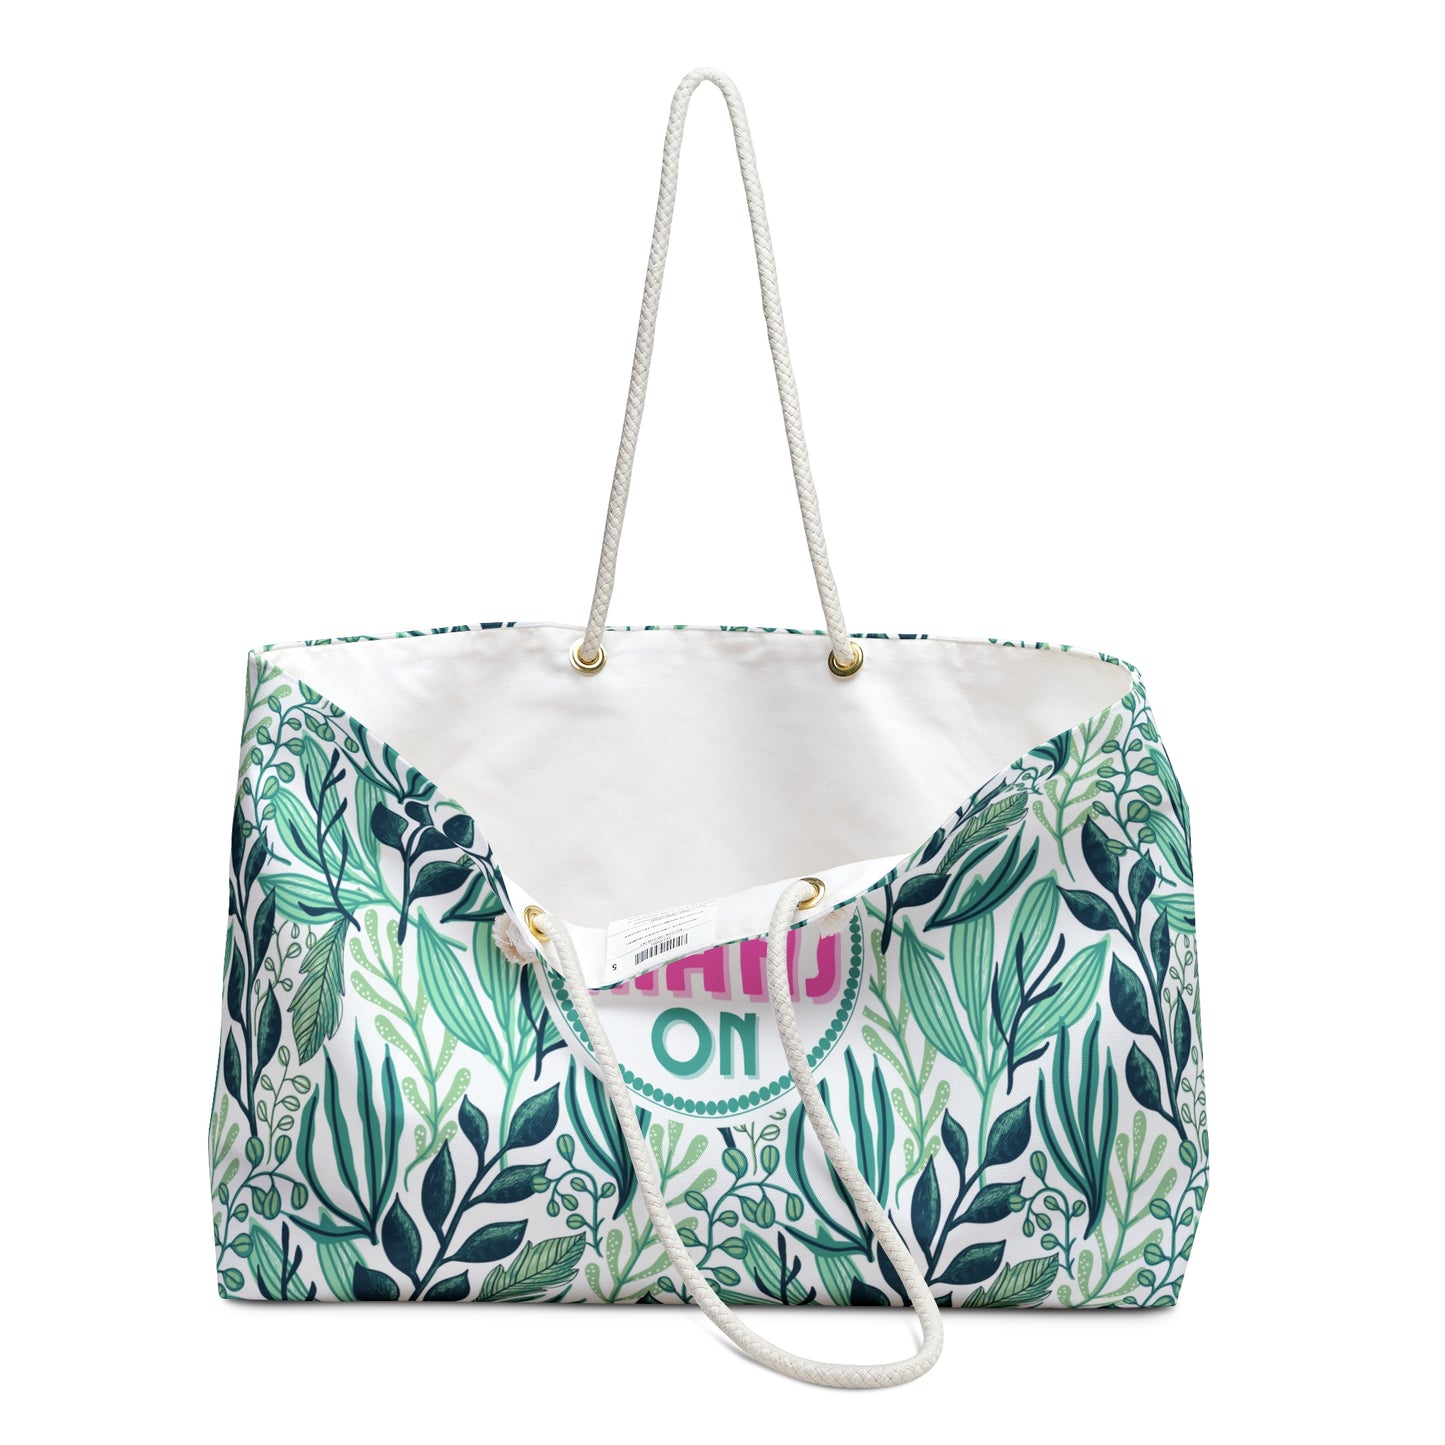 Mahjong Tote Bag. Oversize Carrying Bag to Hold Your Mahjongg Tiles, Mah Jongg Accessories and More. Green Nature Pattern